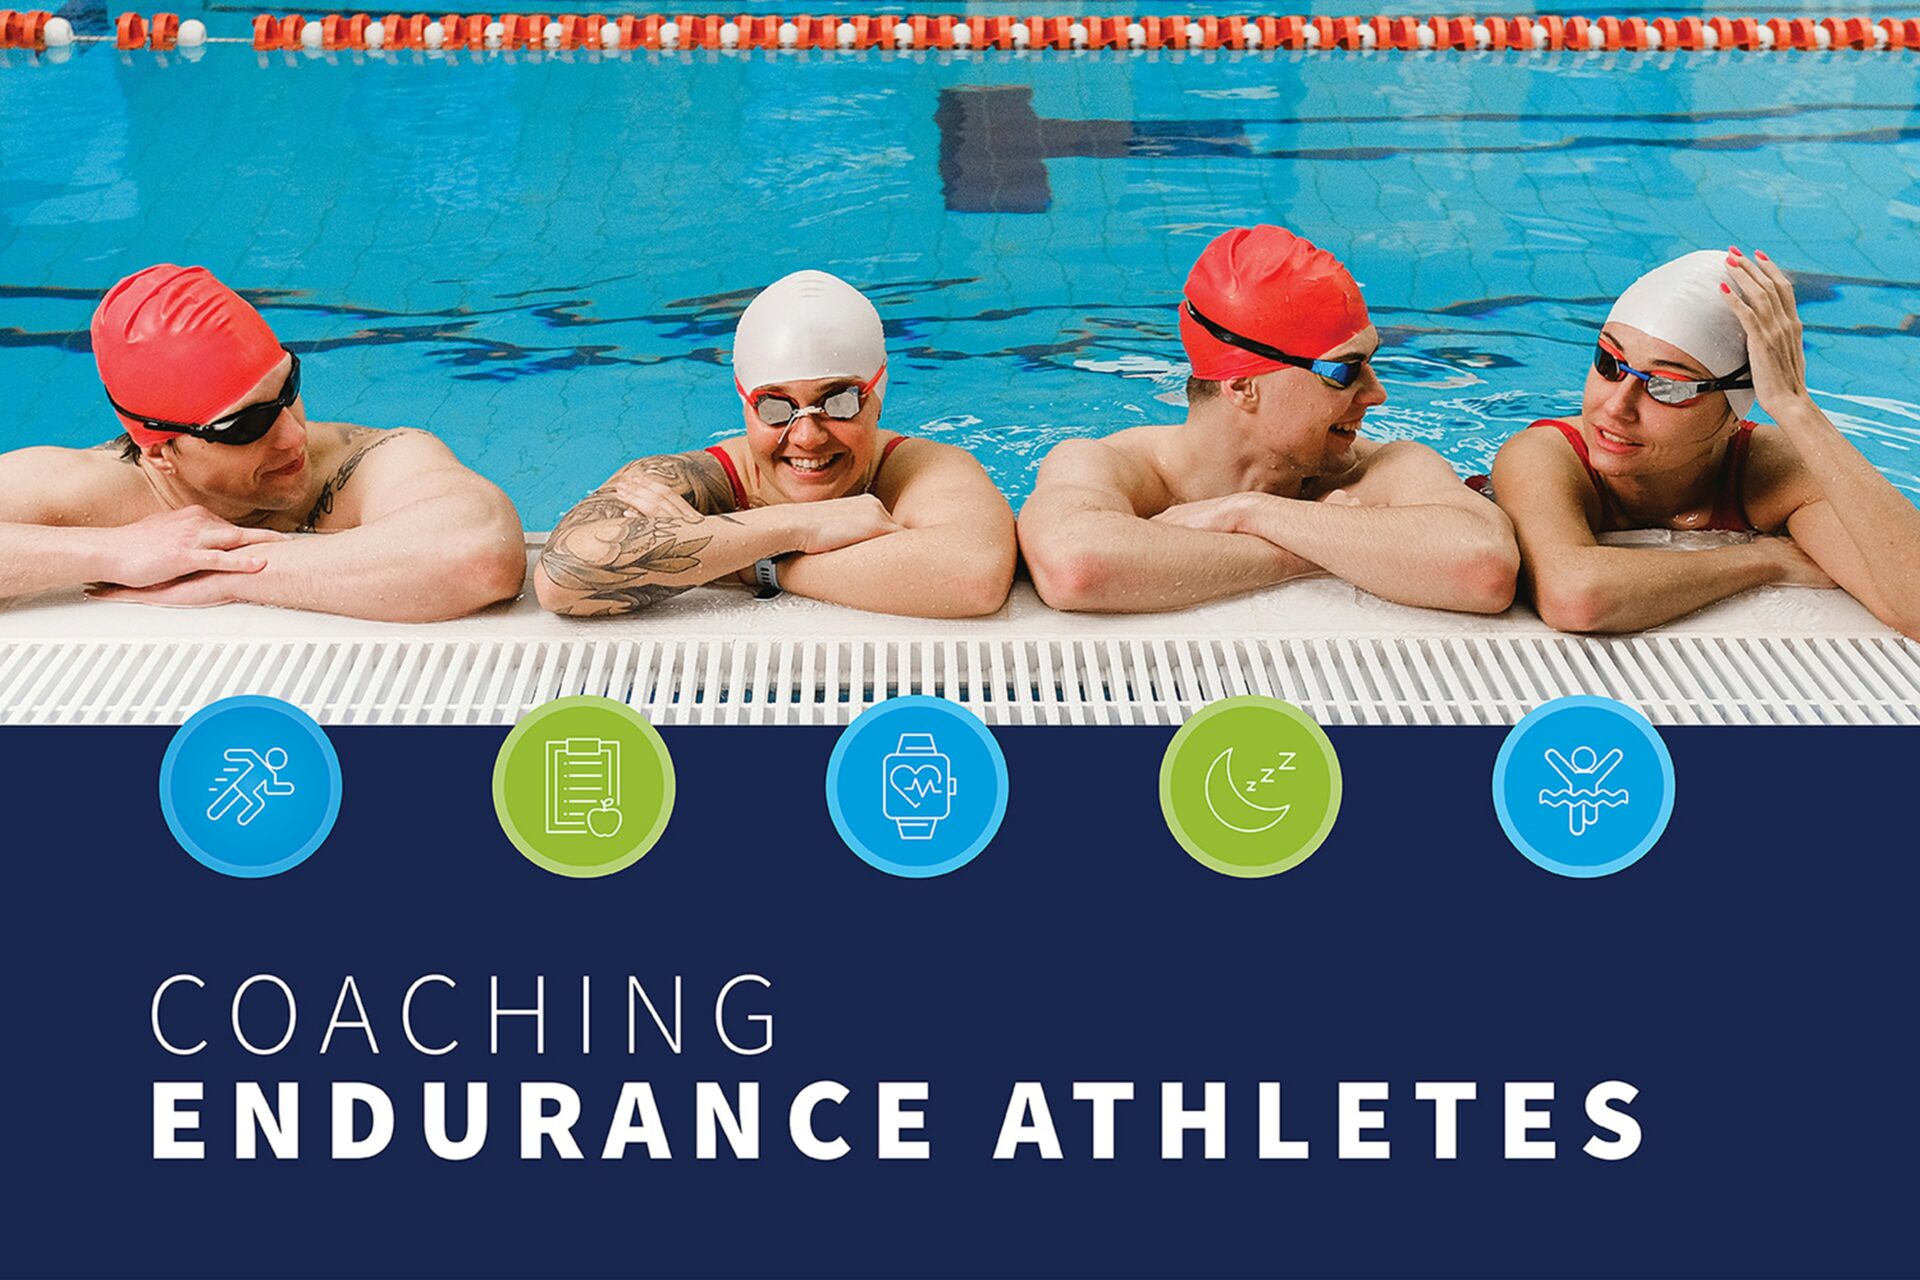 Swimmers on the side of the pool from The Craft of Coaching Module 9